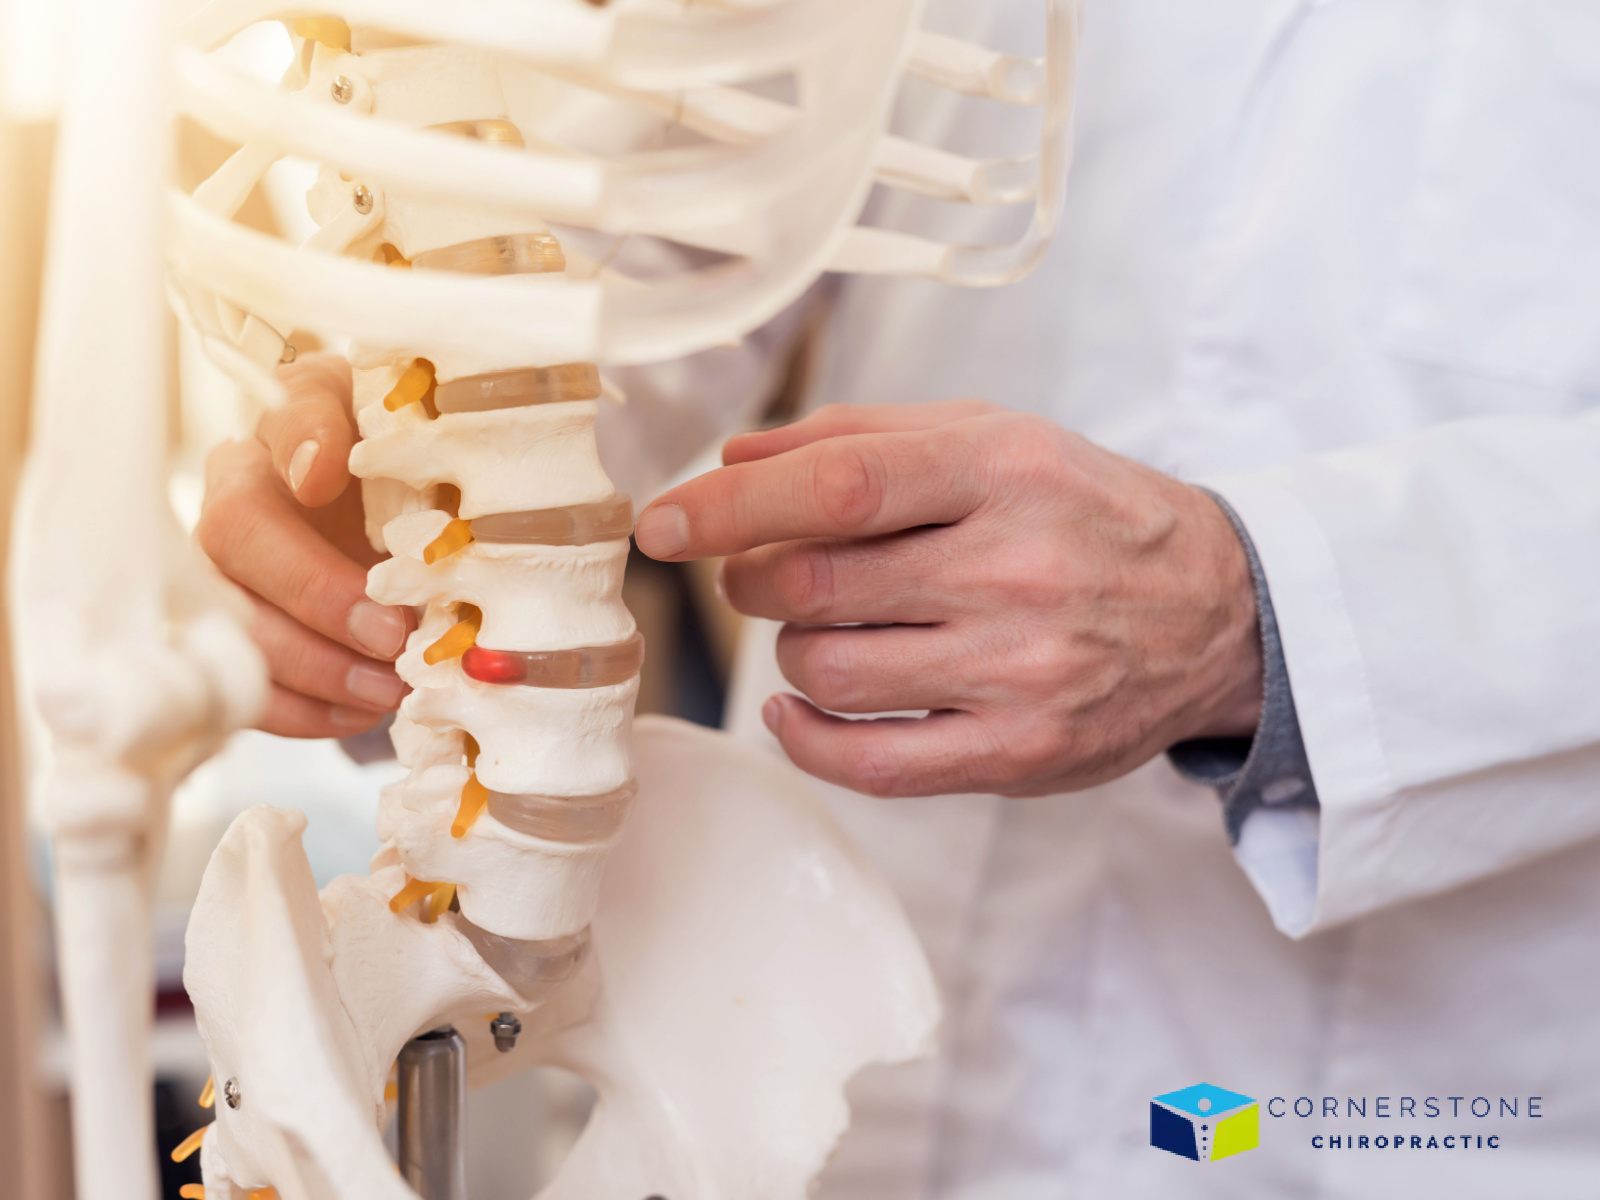 Best Rated Chiropractor Near Clearview, WA